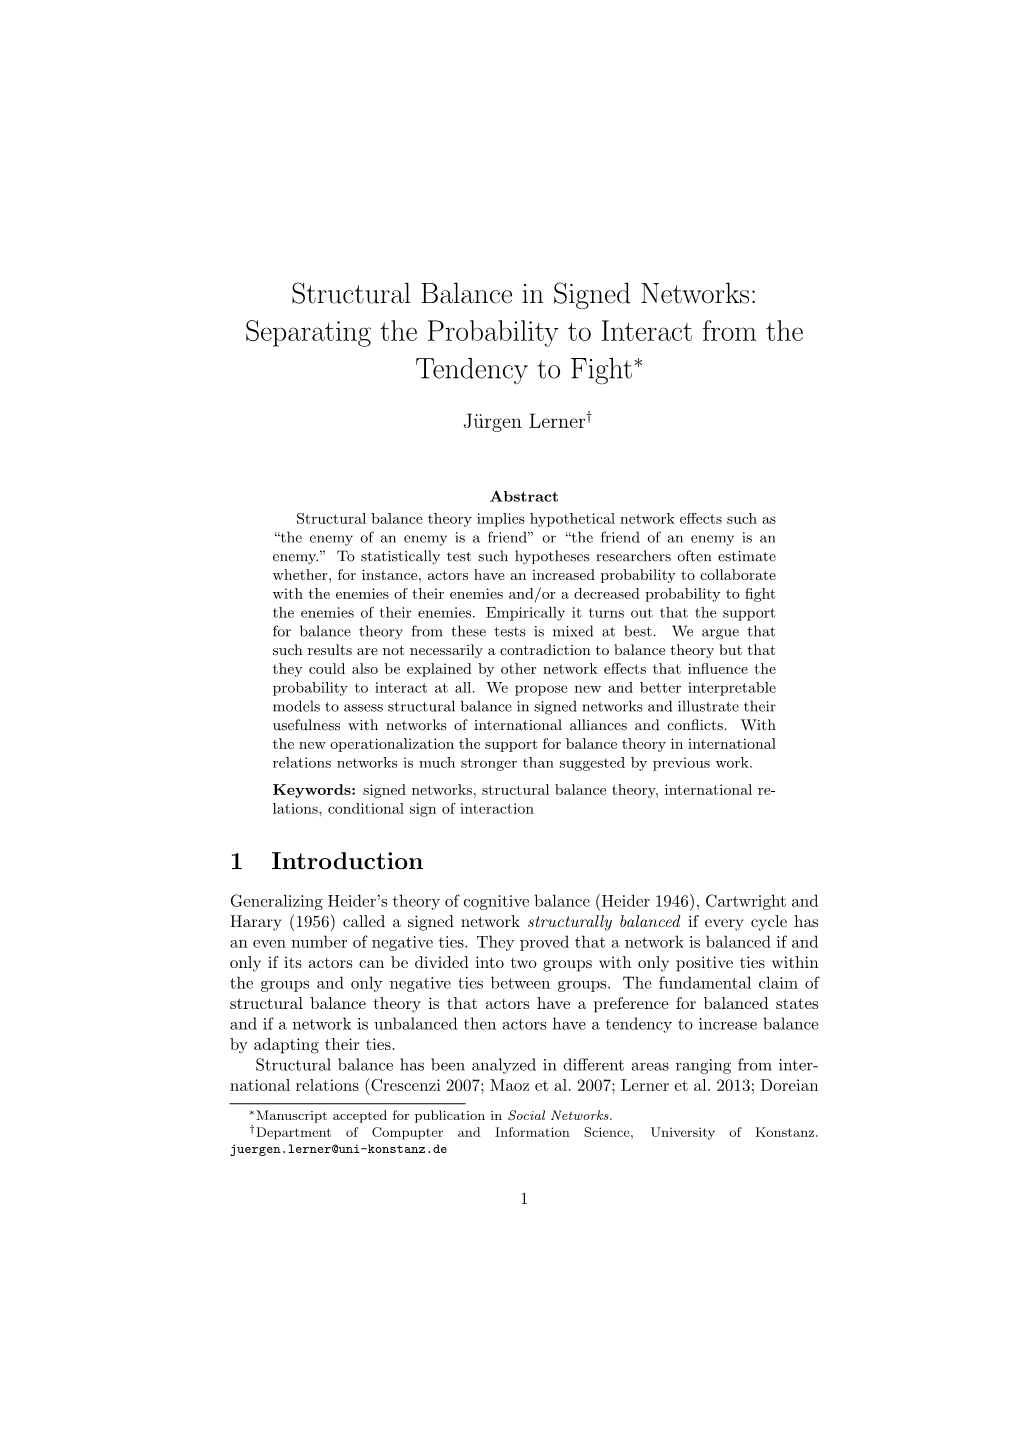 Structural Balance in Signed Networks: Separating the Probability to Interact from the Tendency to Fight∗